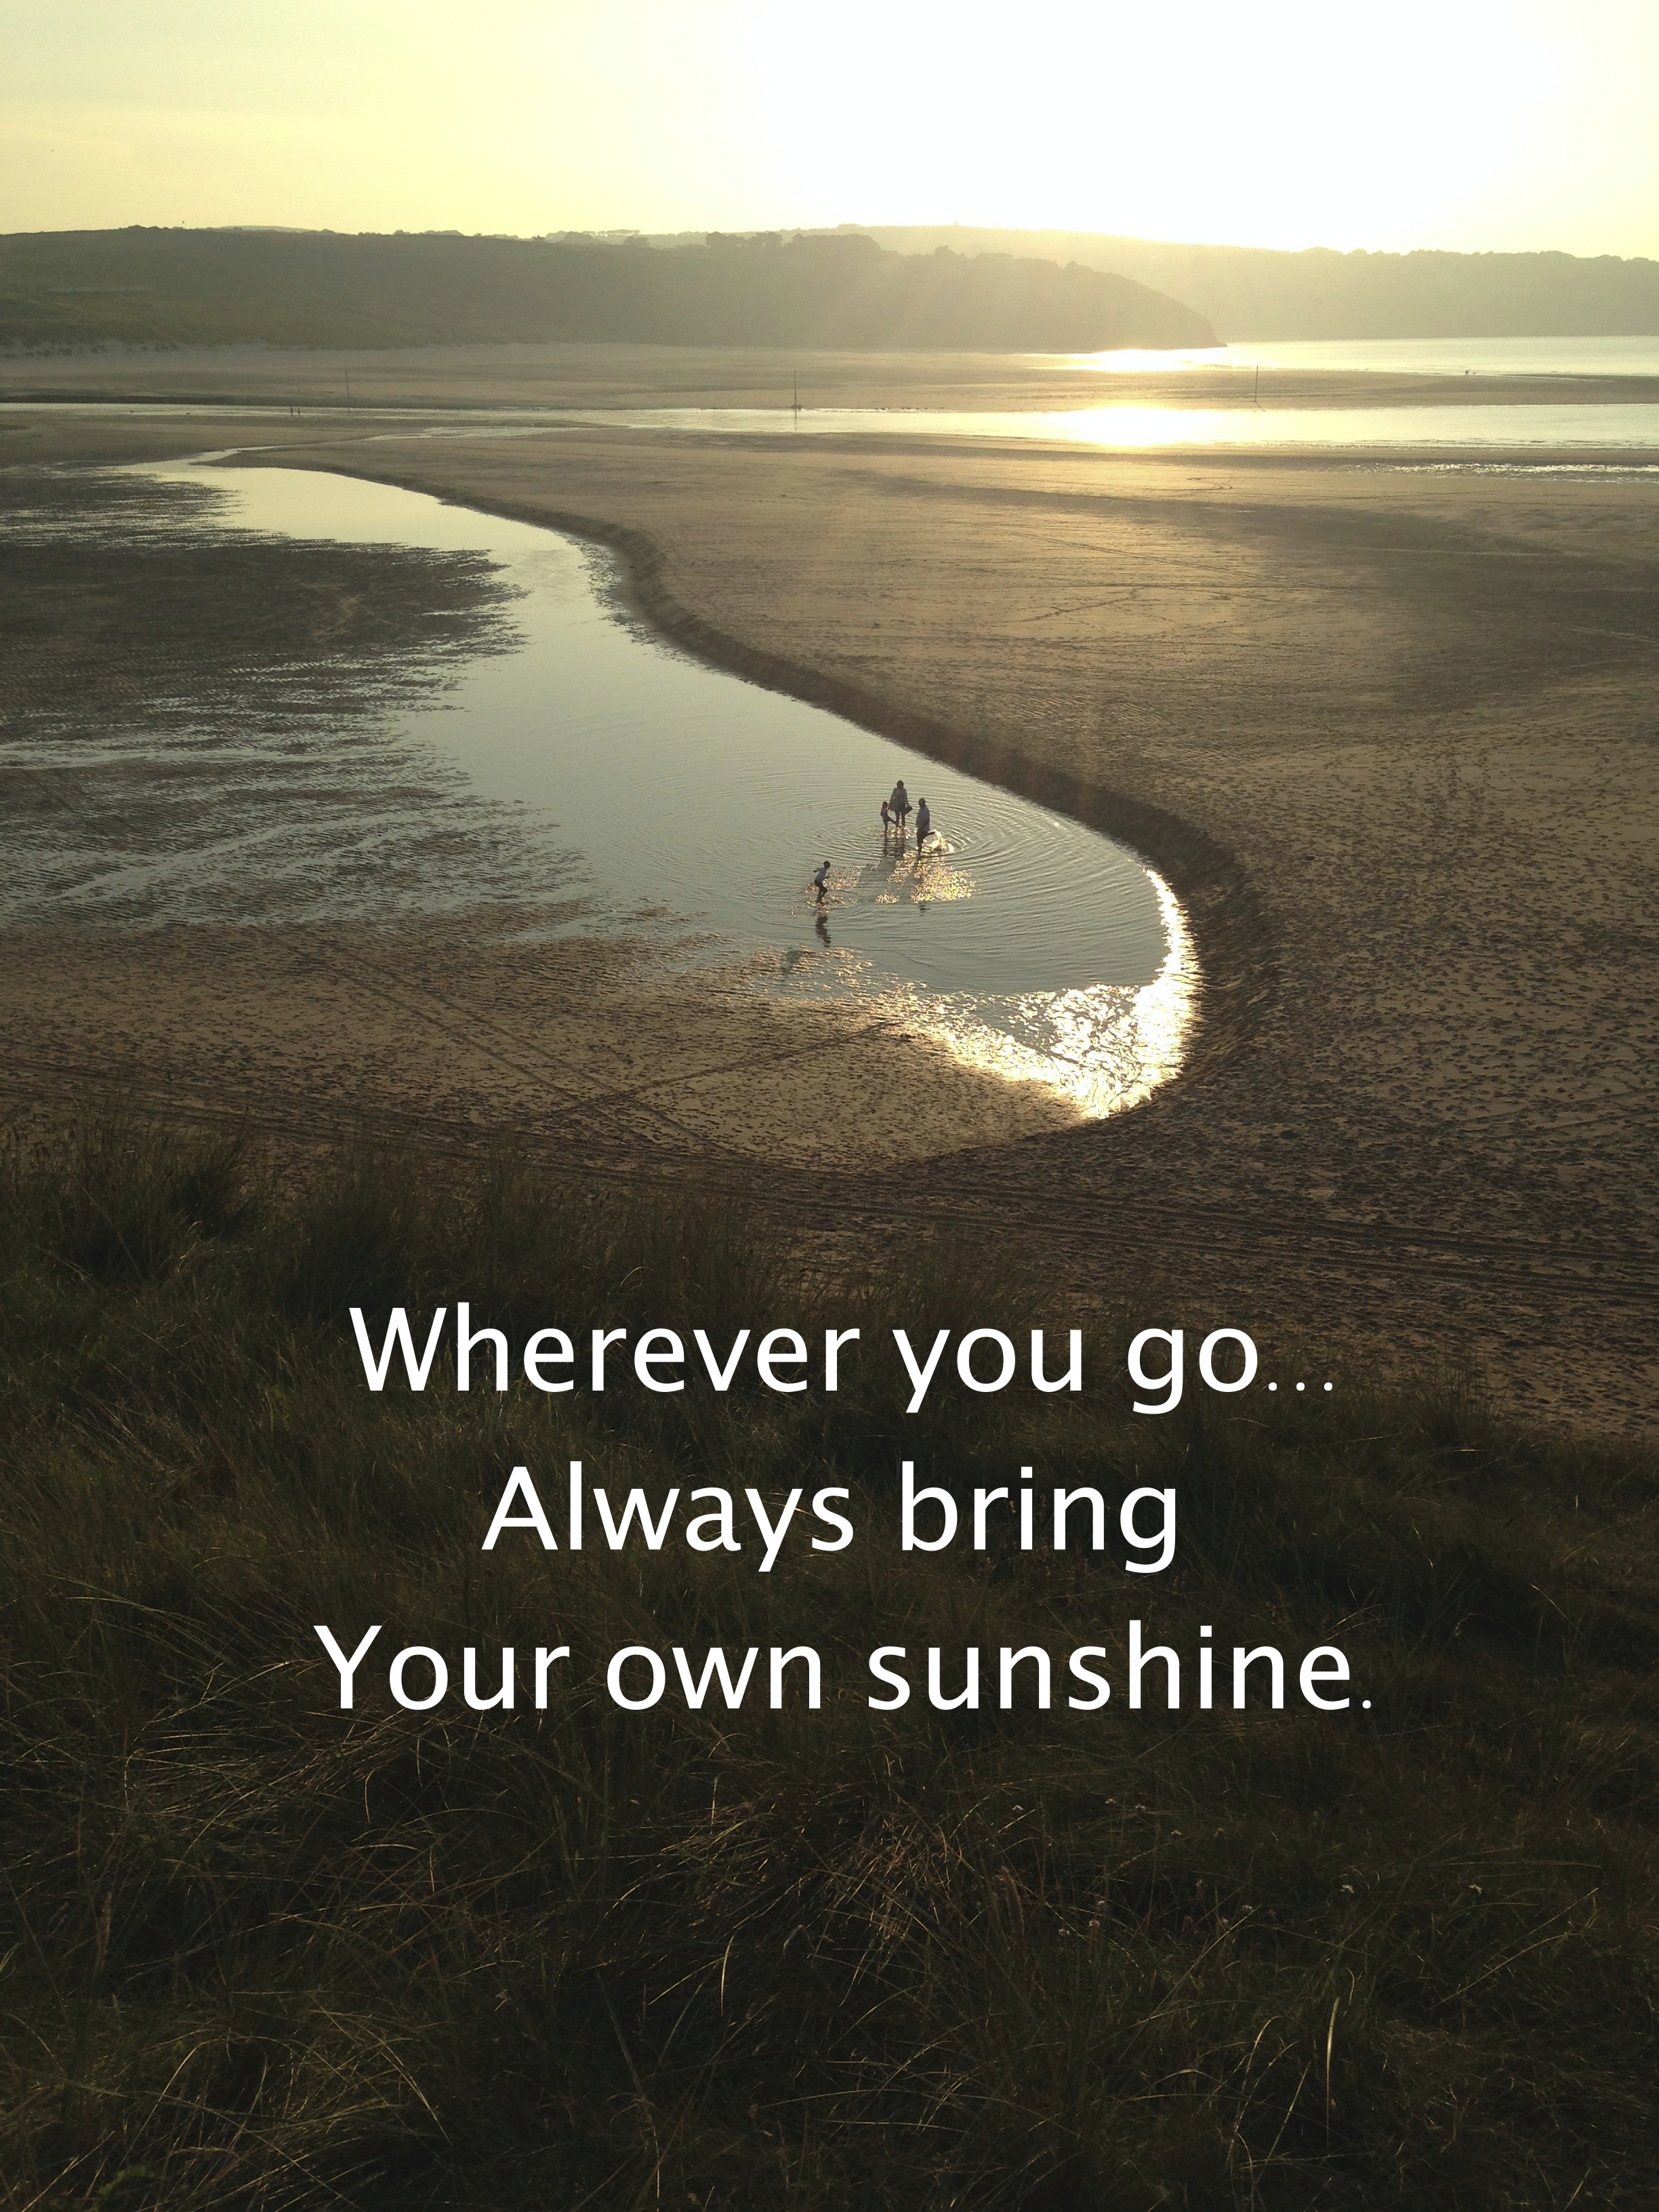 Quote against backdrop of beach bathed in sunshine: Wherever you go always bring your own sunshine